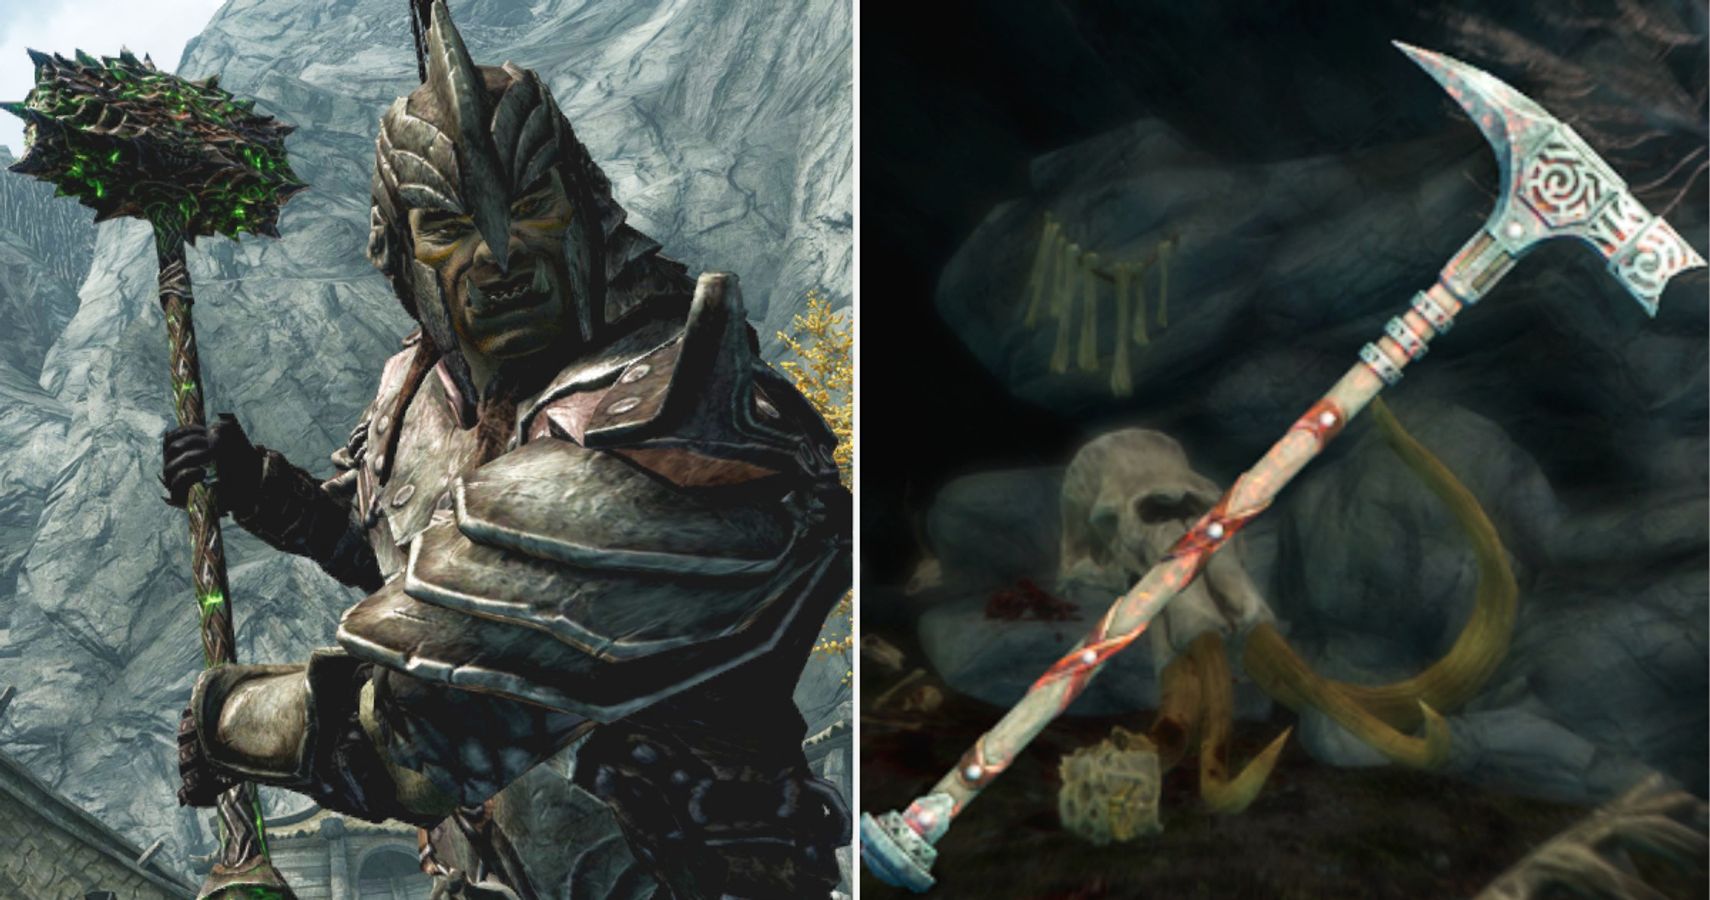 Skyrim: Every Unique Two Handed Hammer In The Game, Ranked Worst To Best